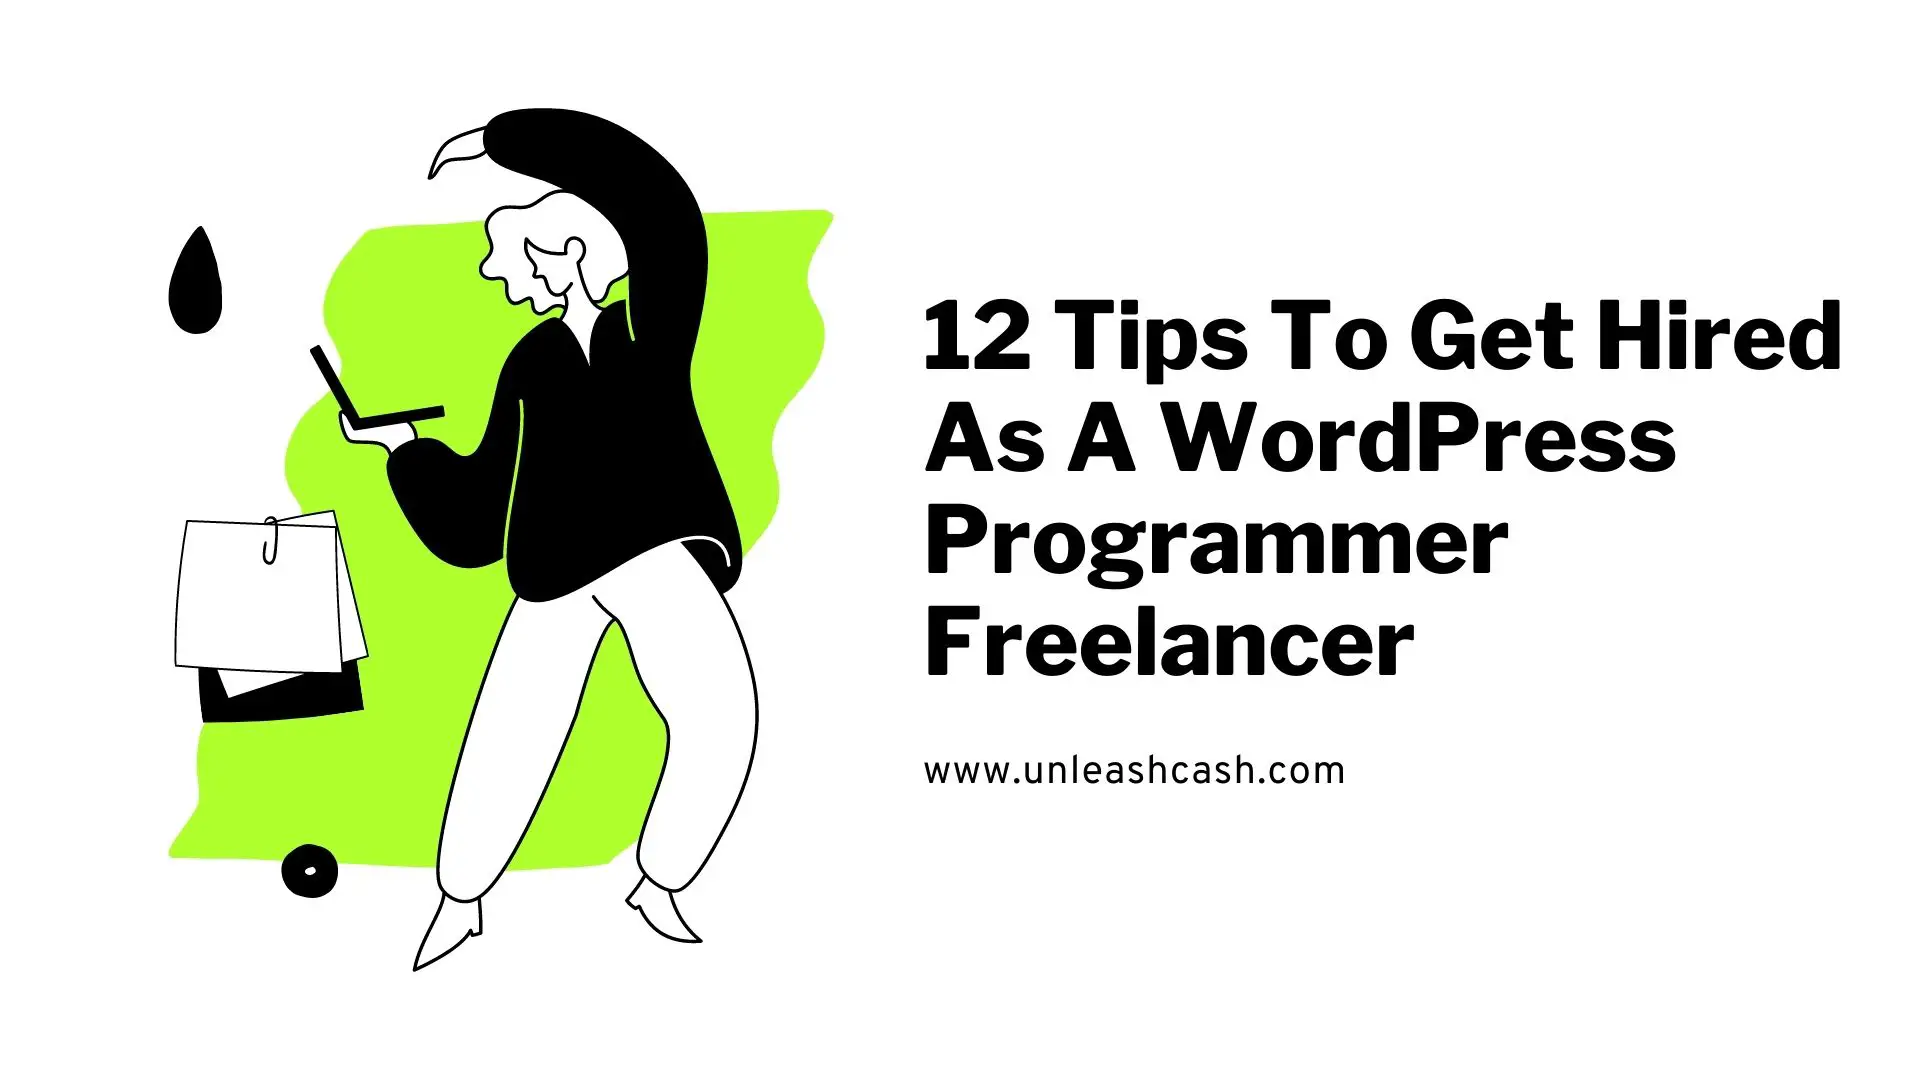 12 Tips To Get Hired As A WordPress Programmer Freelancer